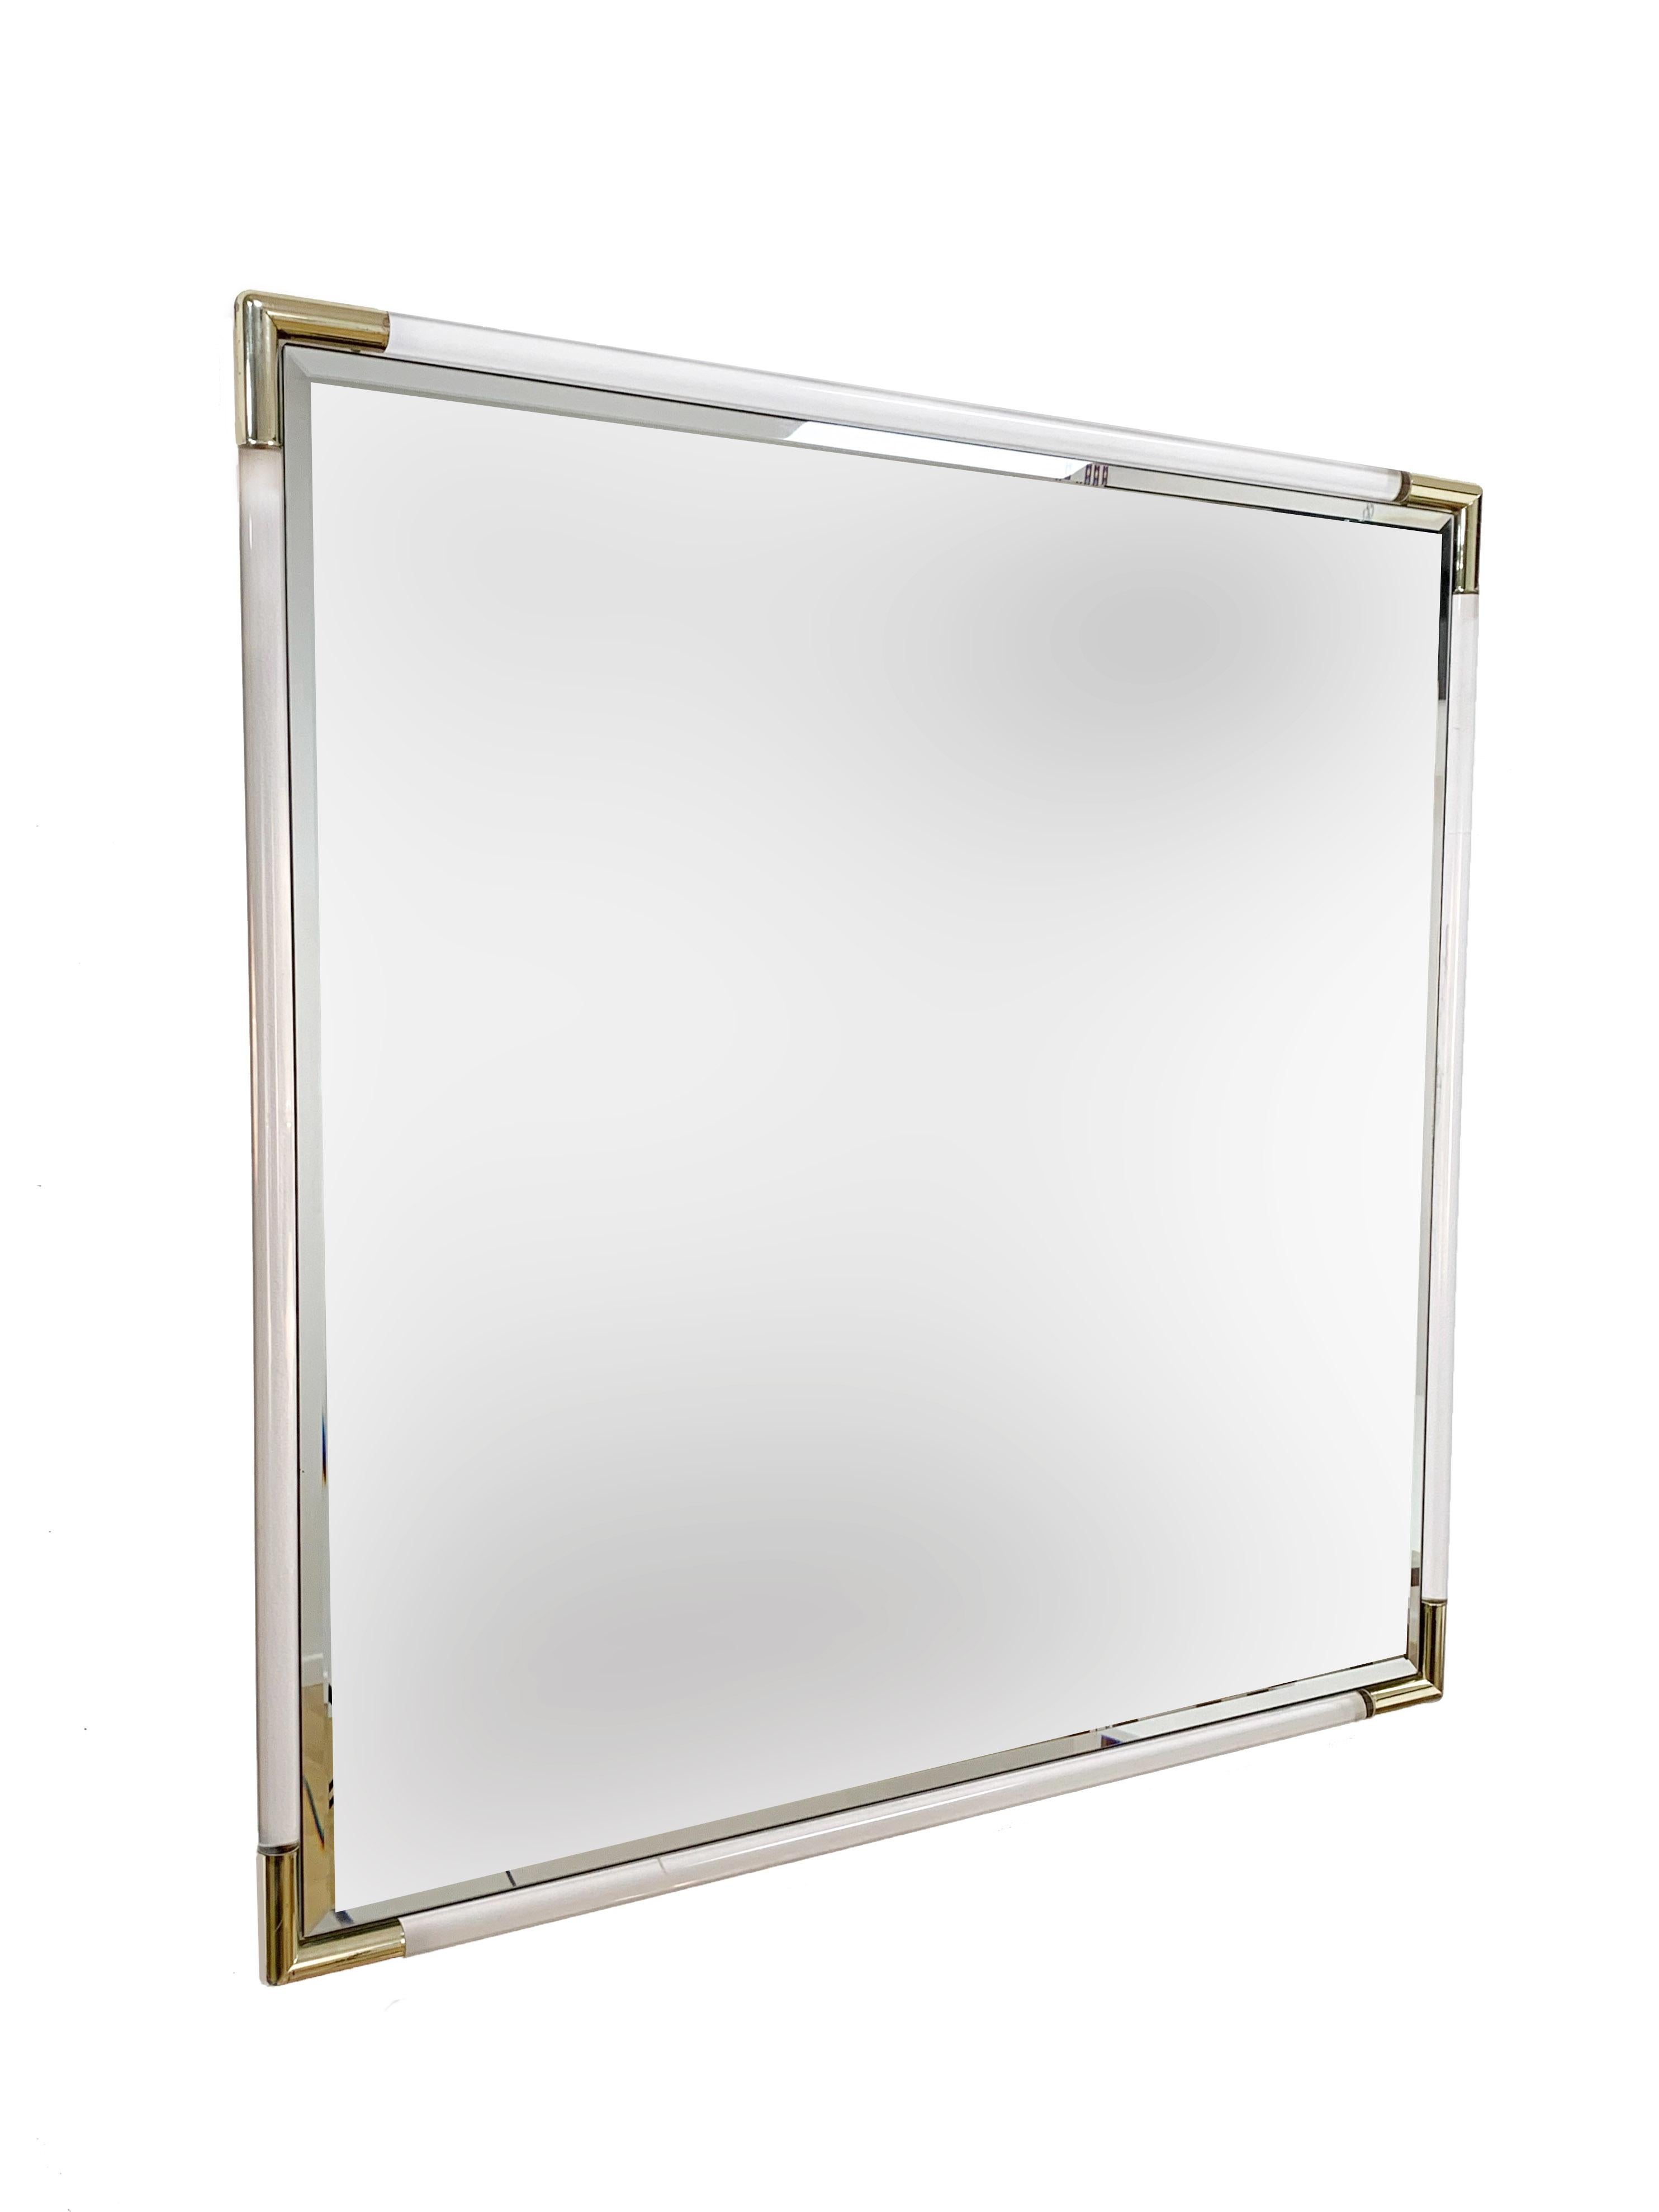 Fantastic wall mirror signed Eclisse finely carved with a Lucite frame and golden metal corners.

This amazing square mirror was produced in Italy during the 1970s.

This piece will be a midcentury fresh addition in a beach house decoration,